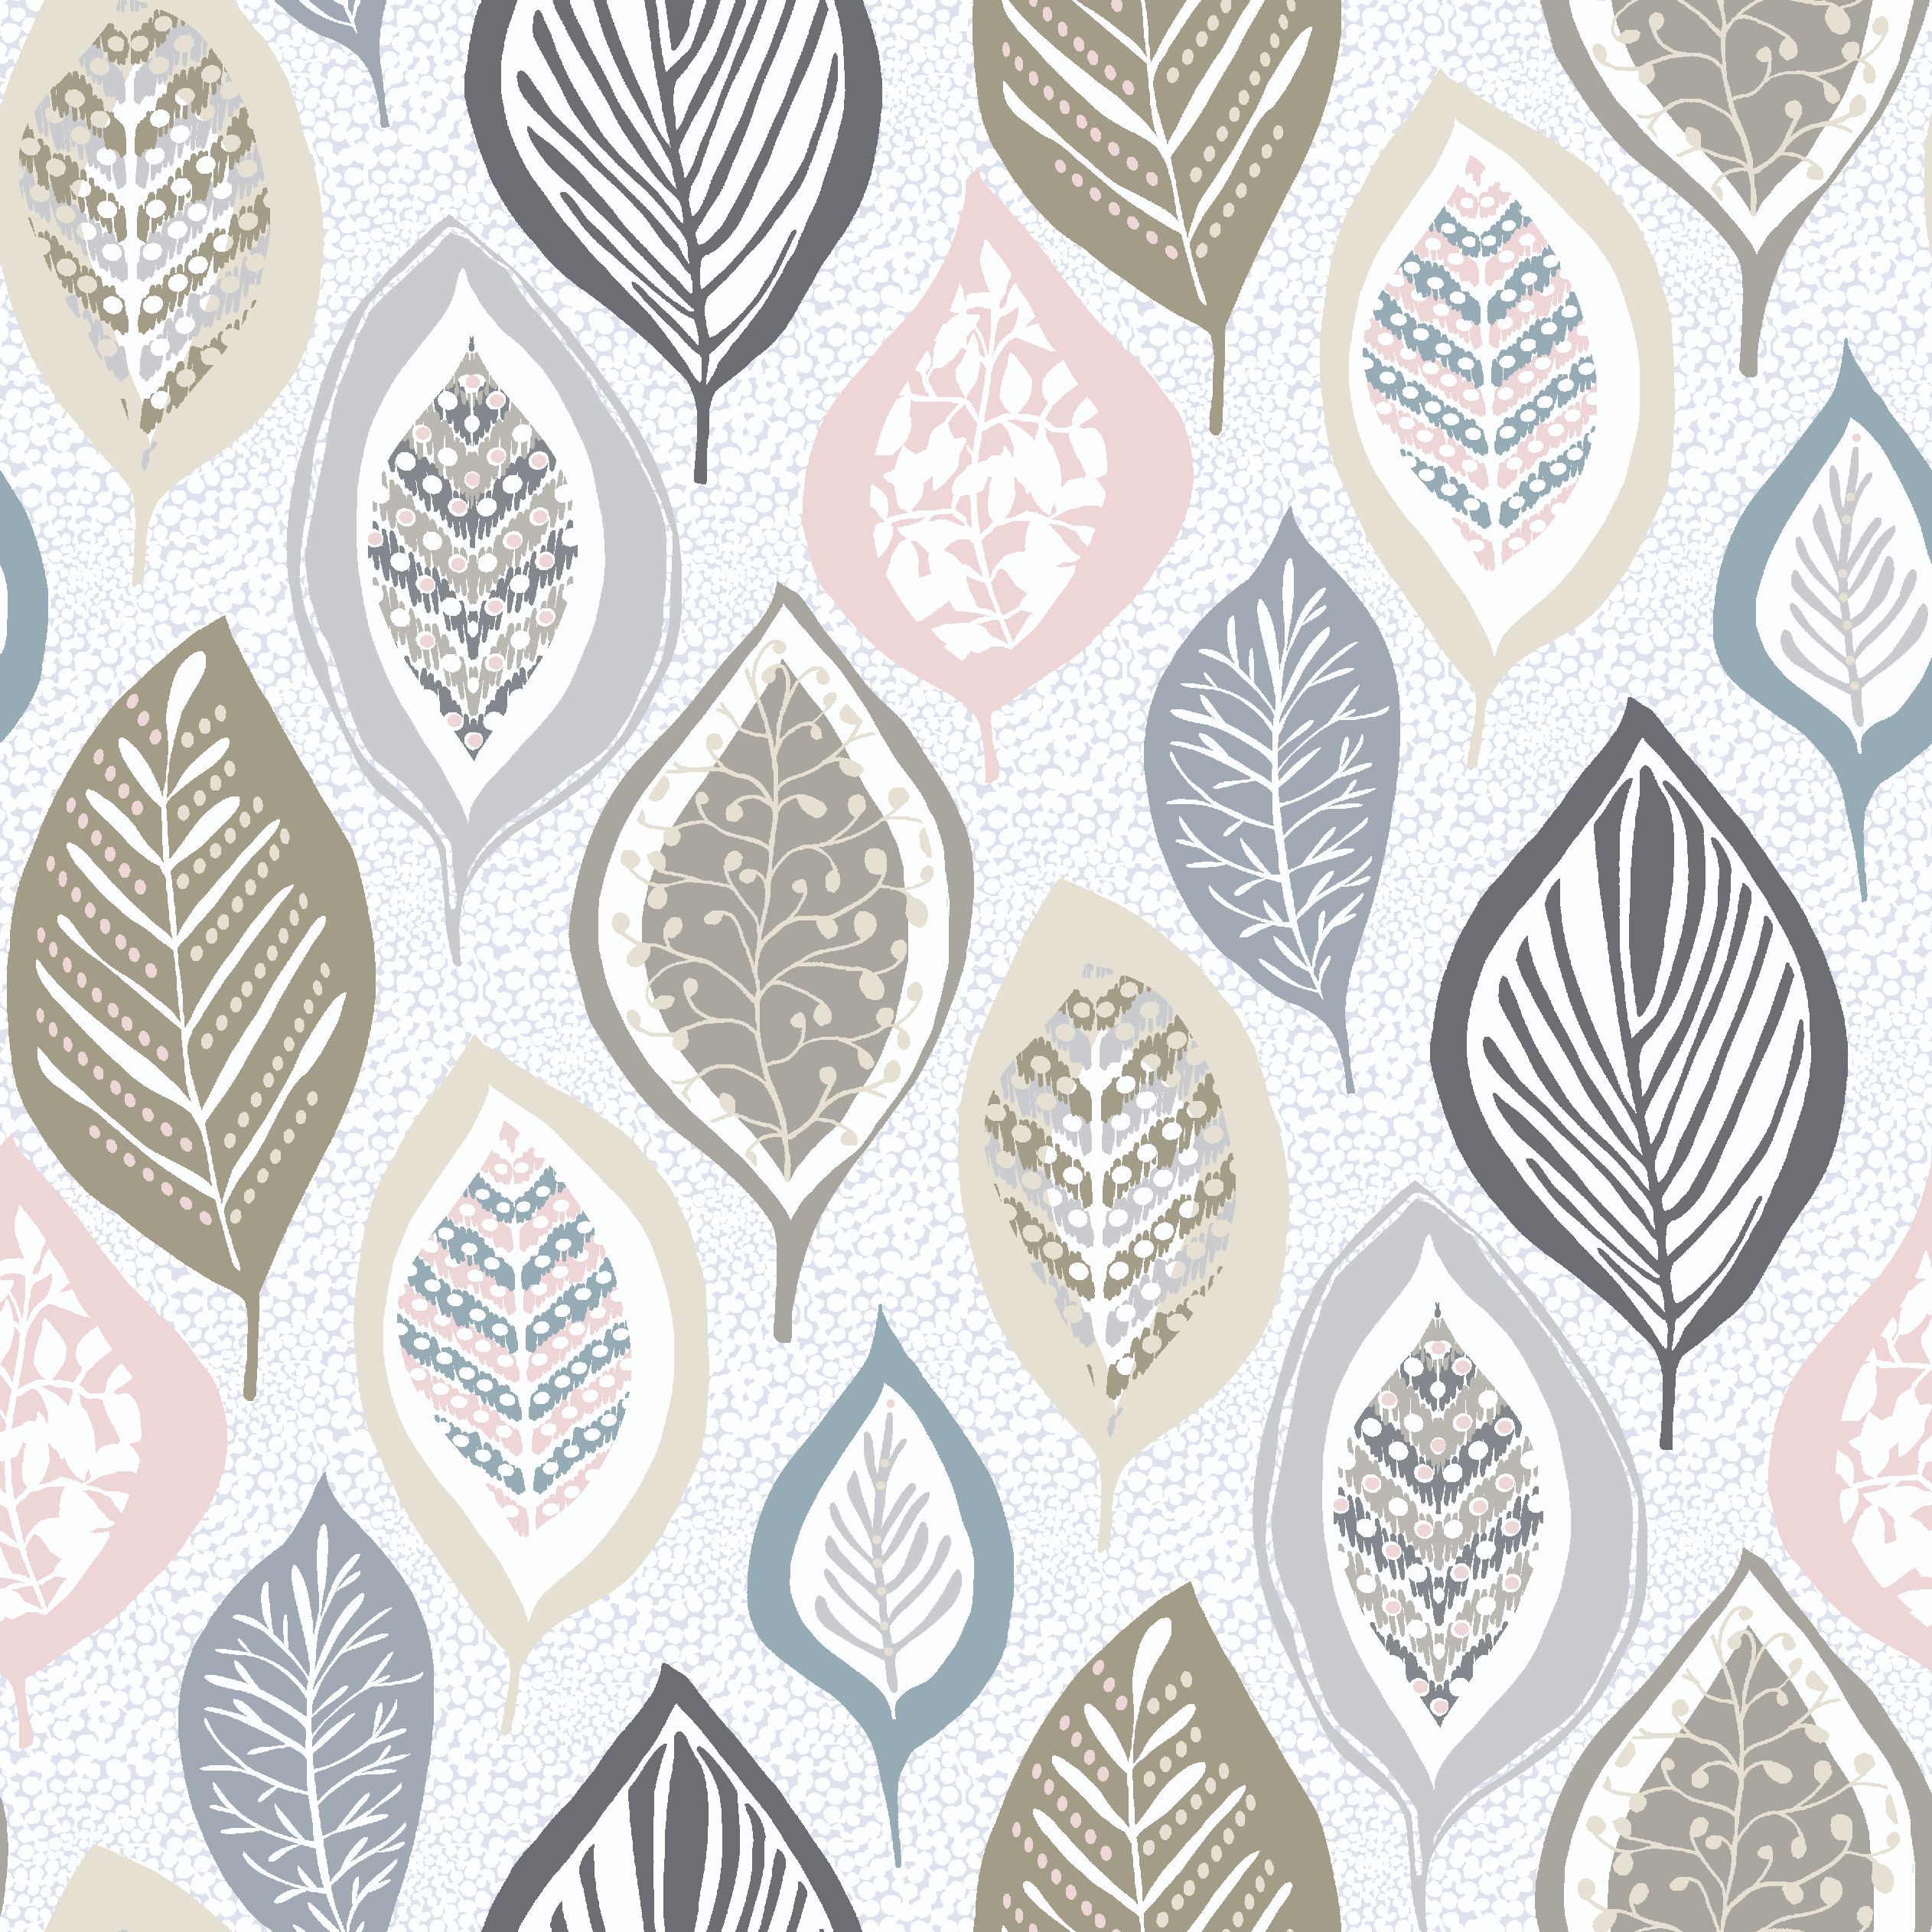 Waverly Inspirations Cotton 44" Organice Leaves Neutral Color Sewing Fabric by the Yard